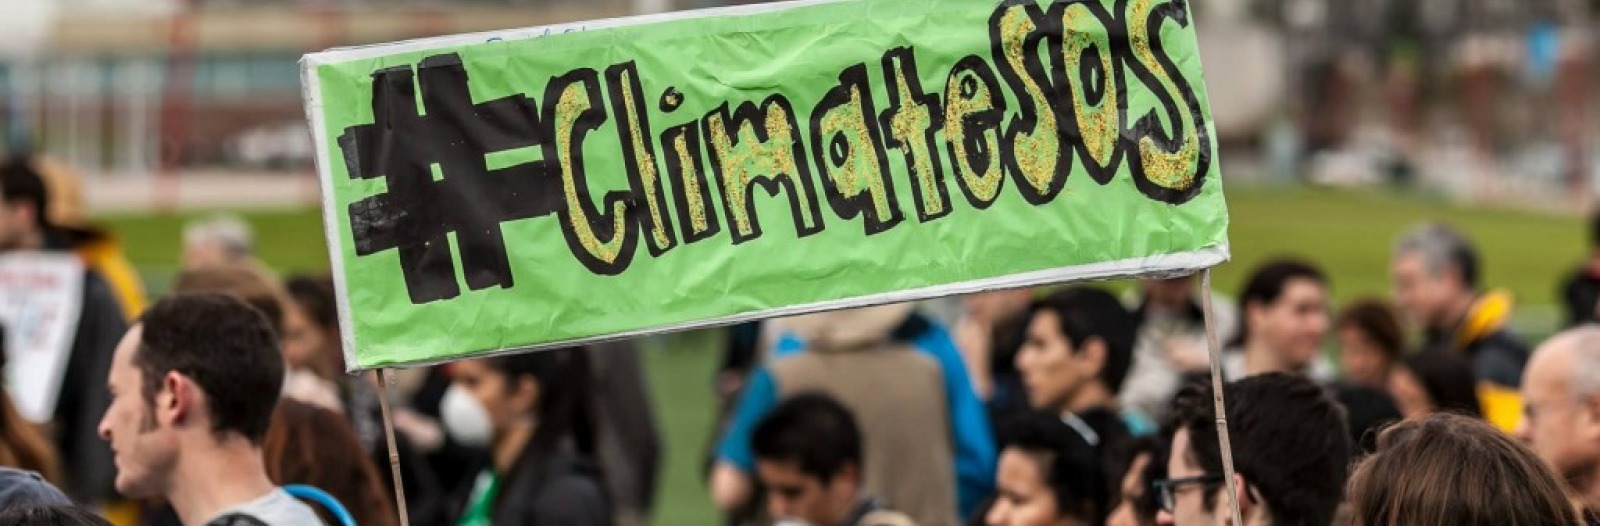 Green Climate sos banner at a march